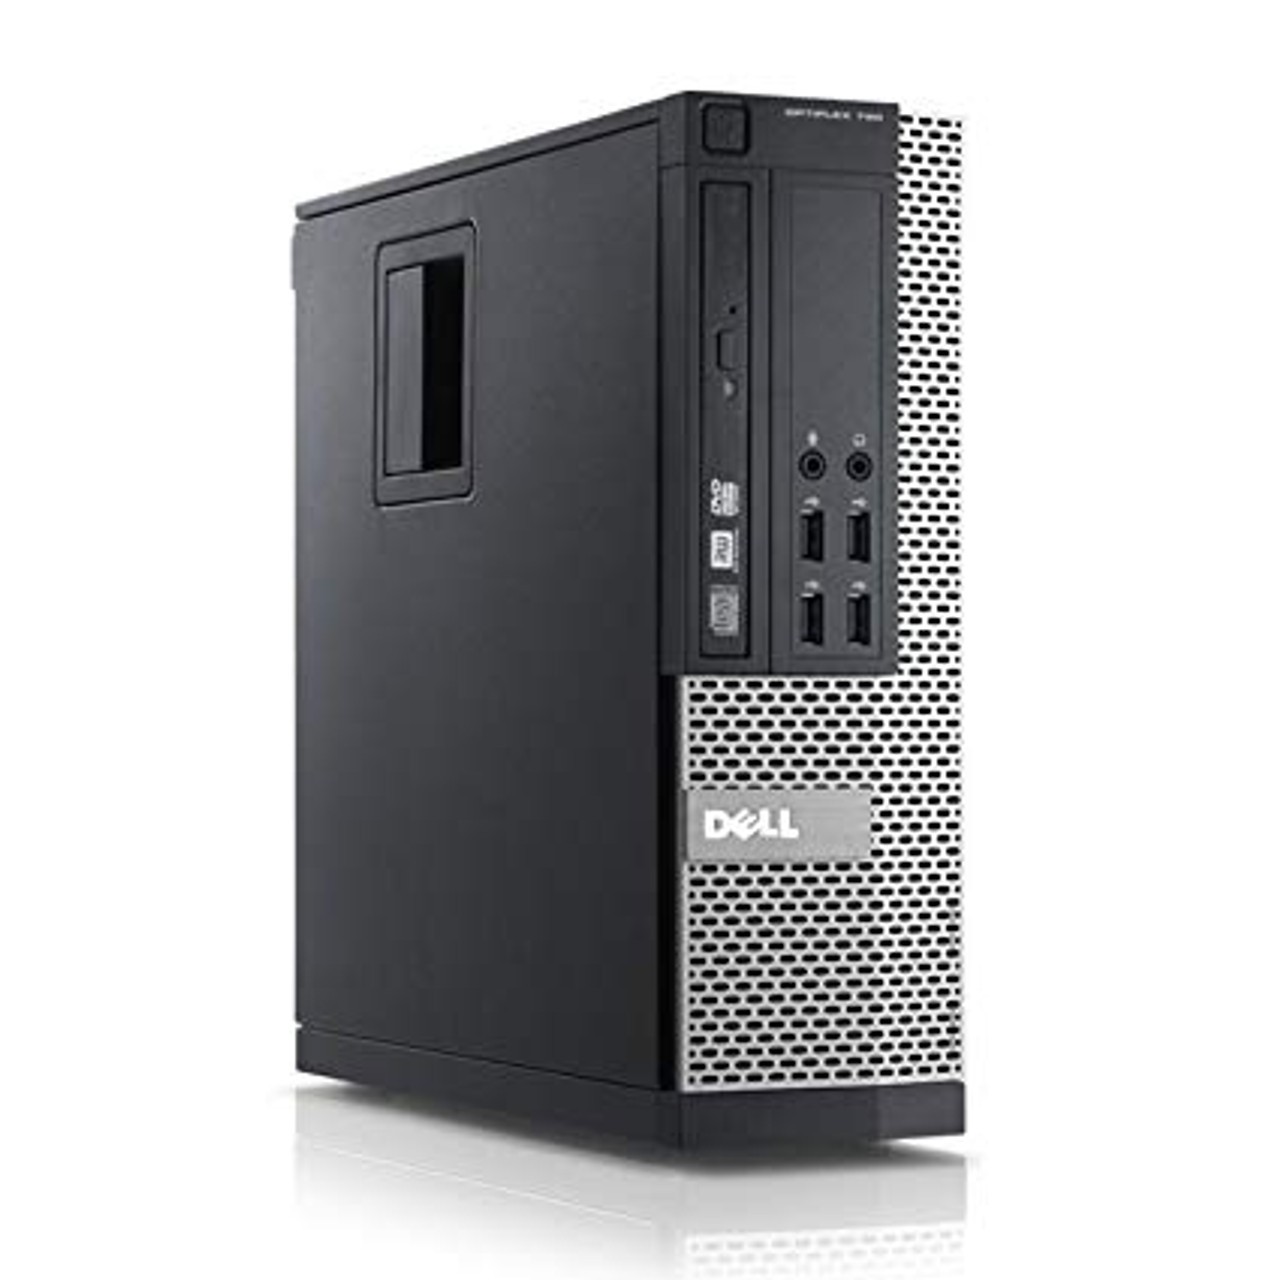 Dell PC Computer Desktop CORE i5 3.0GHz 8GB 120GB SSD Windows 10 with Dual  Graphics Card